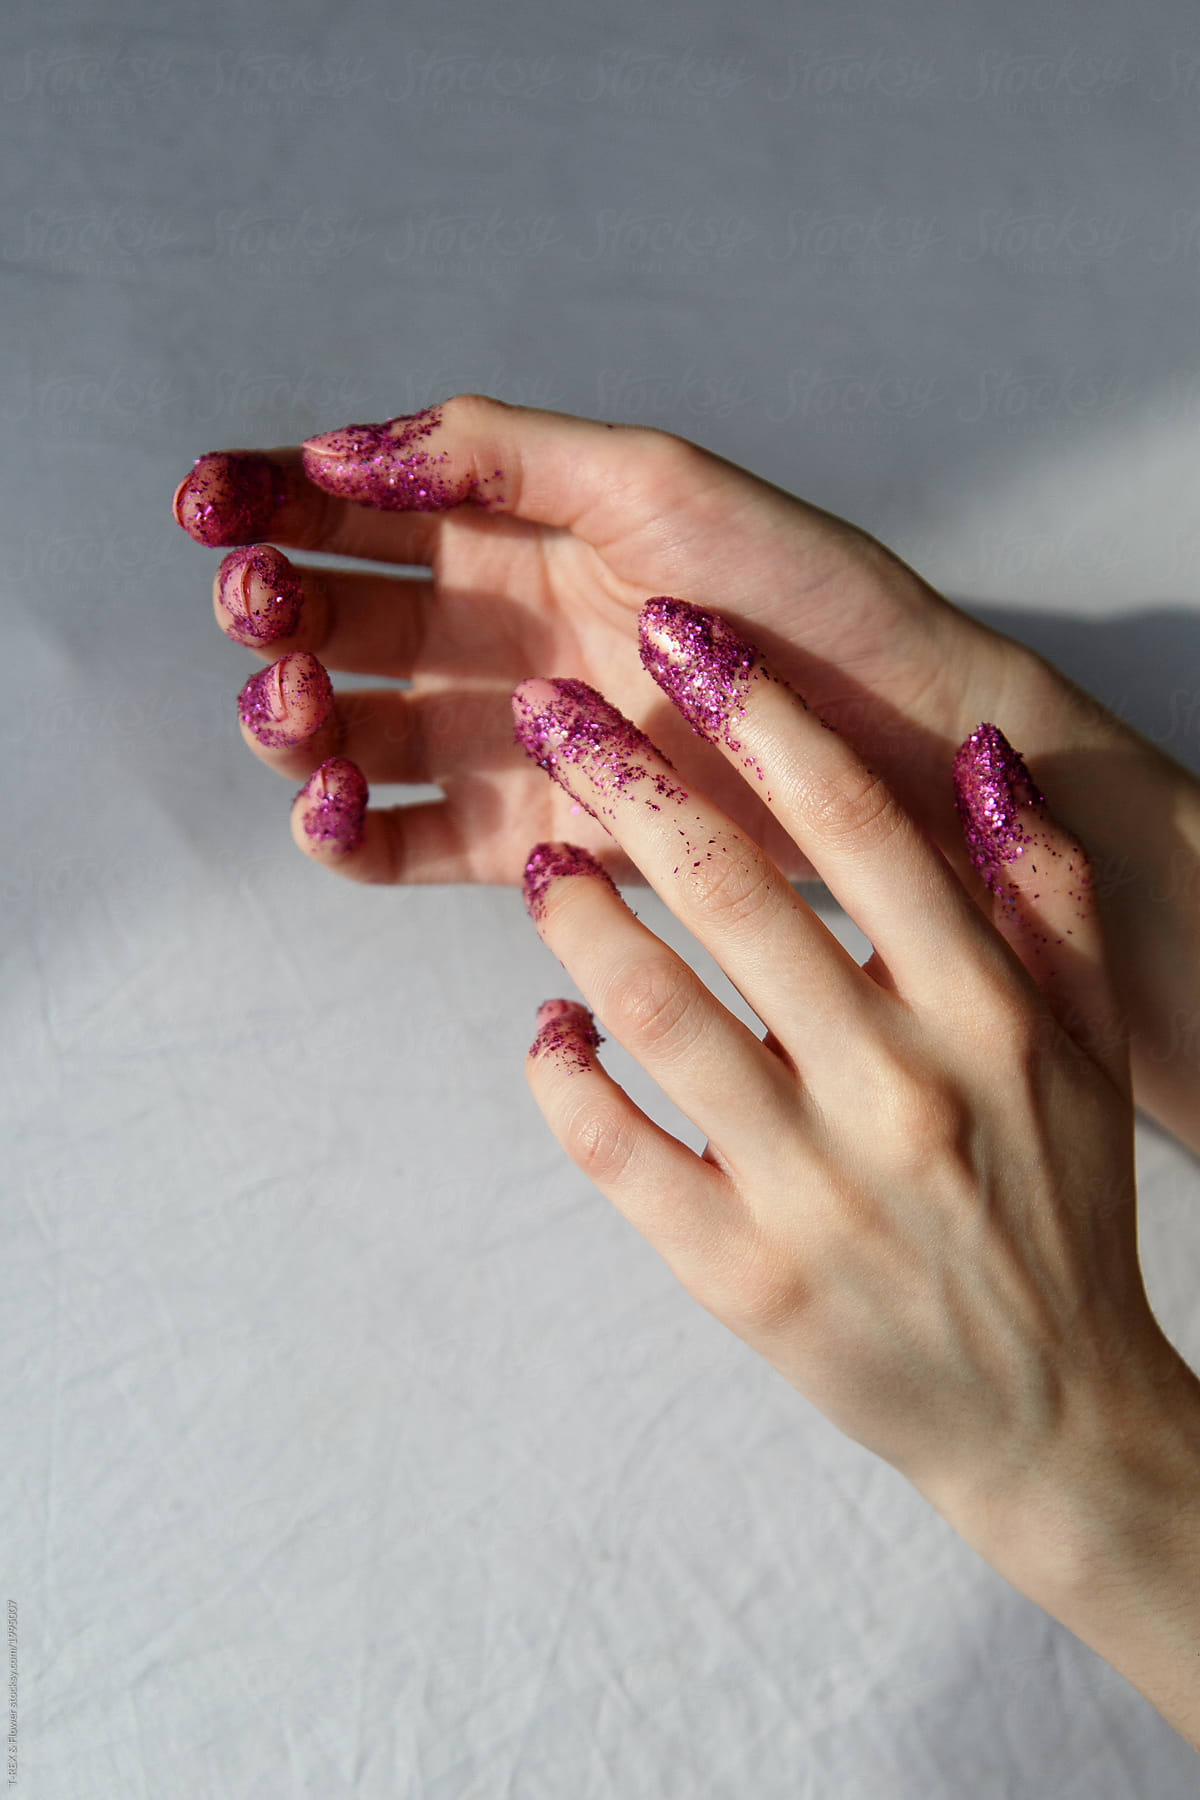 Woman hands with fingers covered in glitter